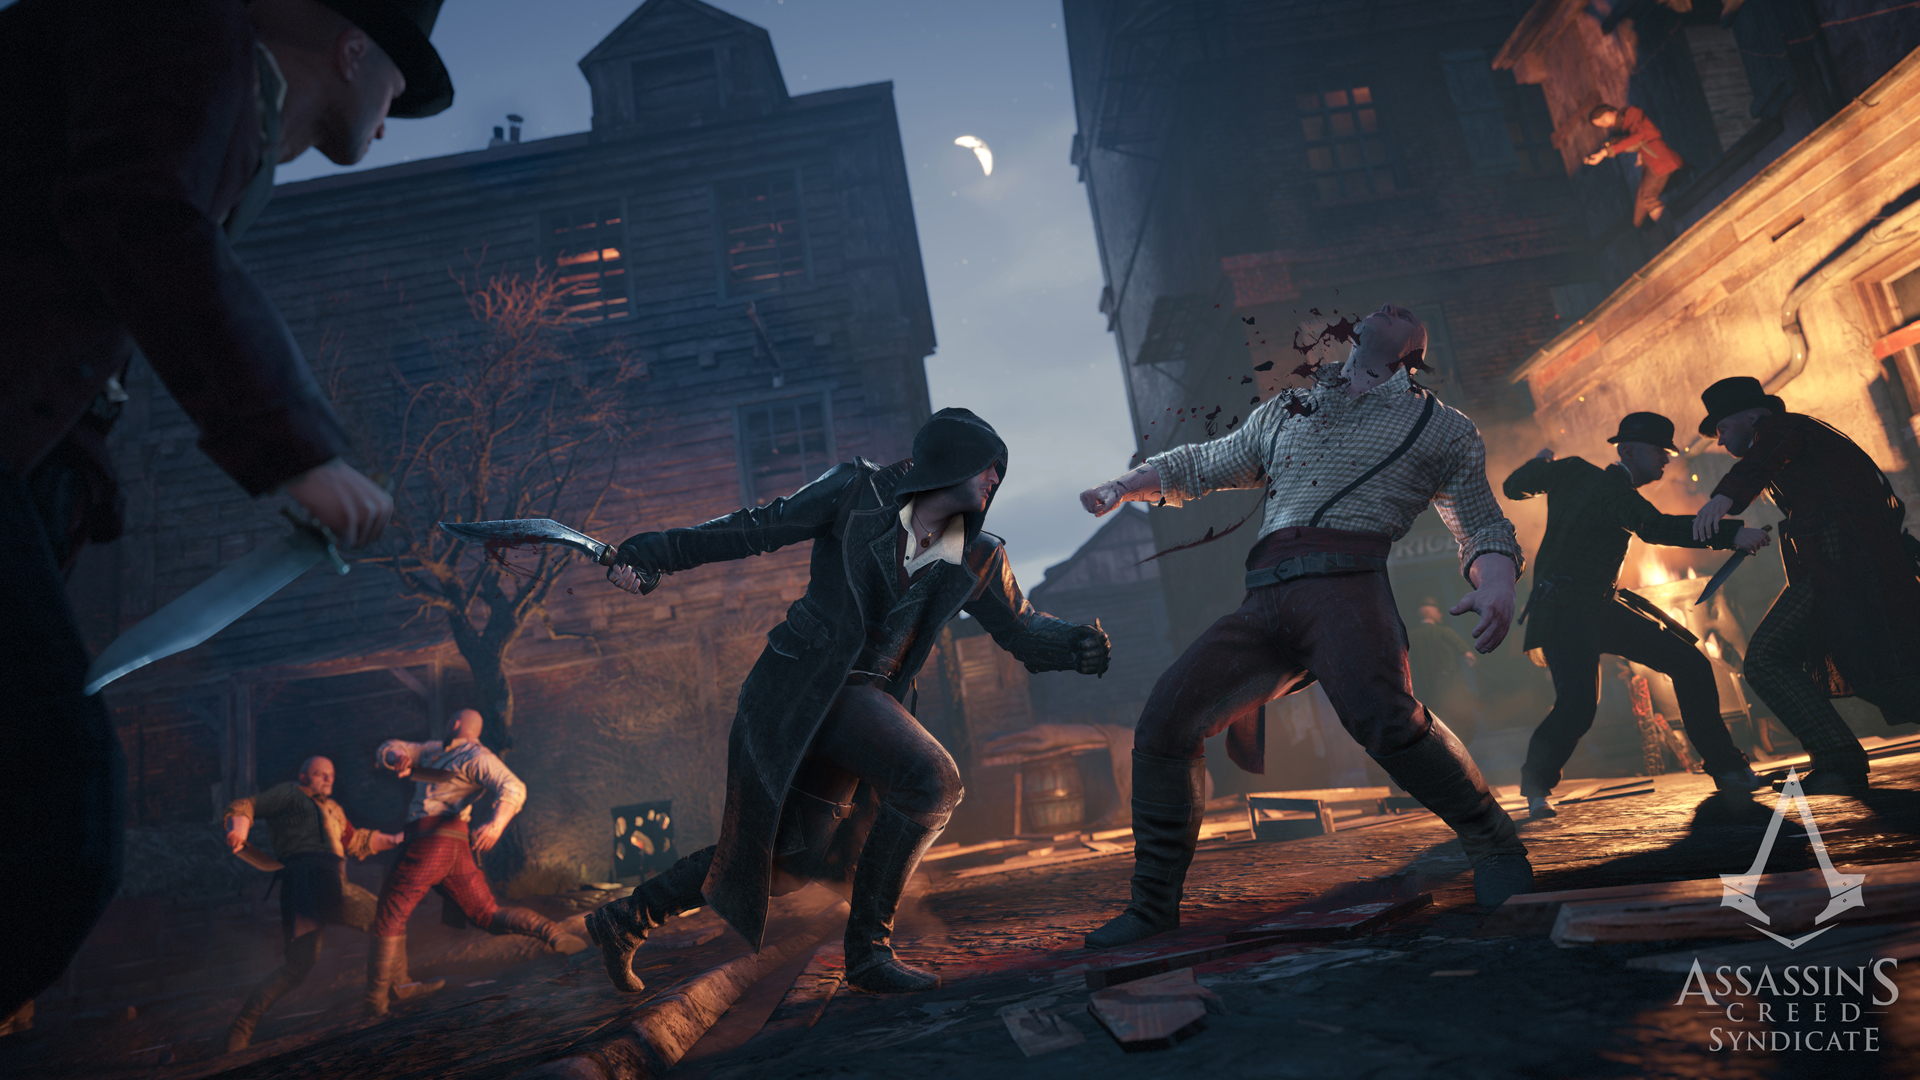 3. Assassin's Creed Syndicate